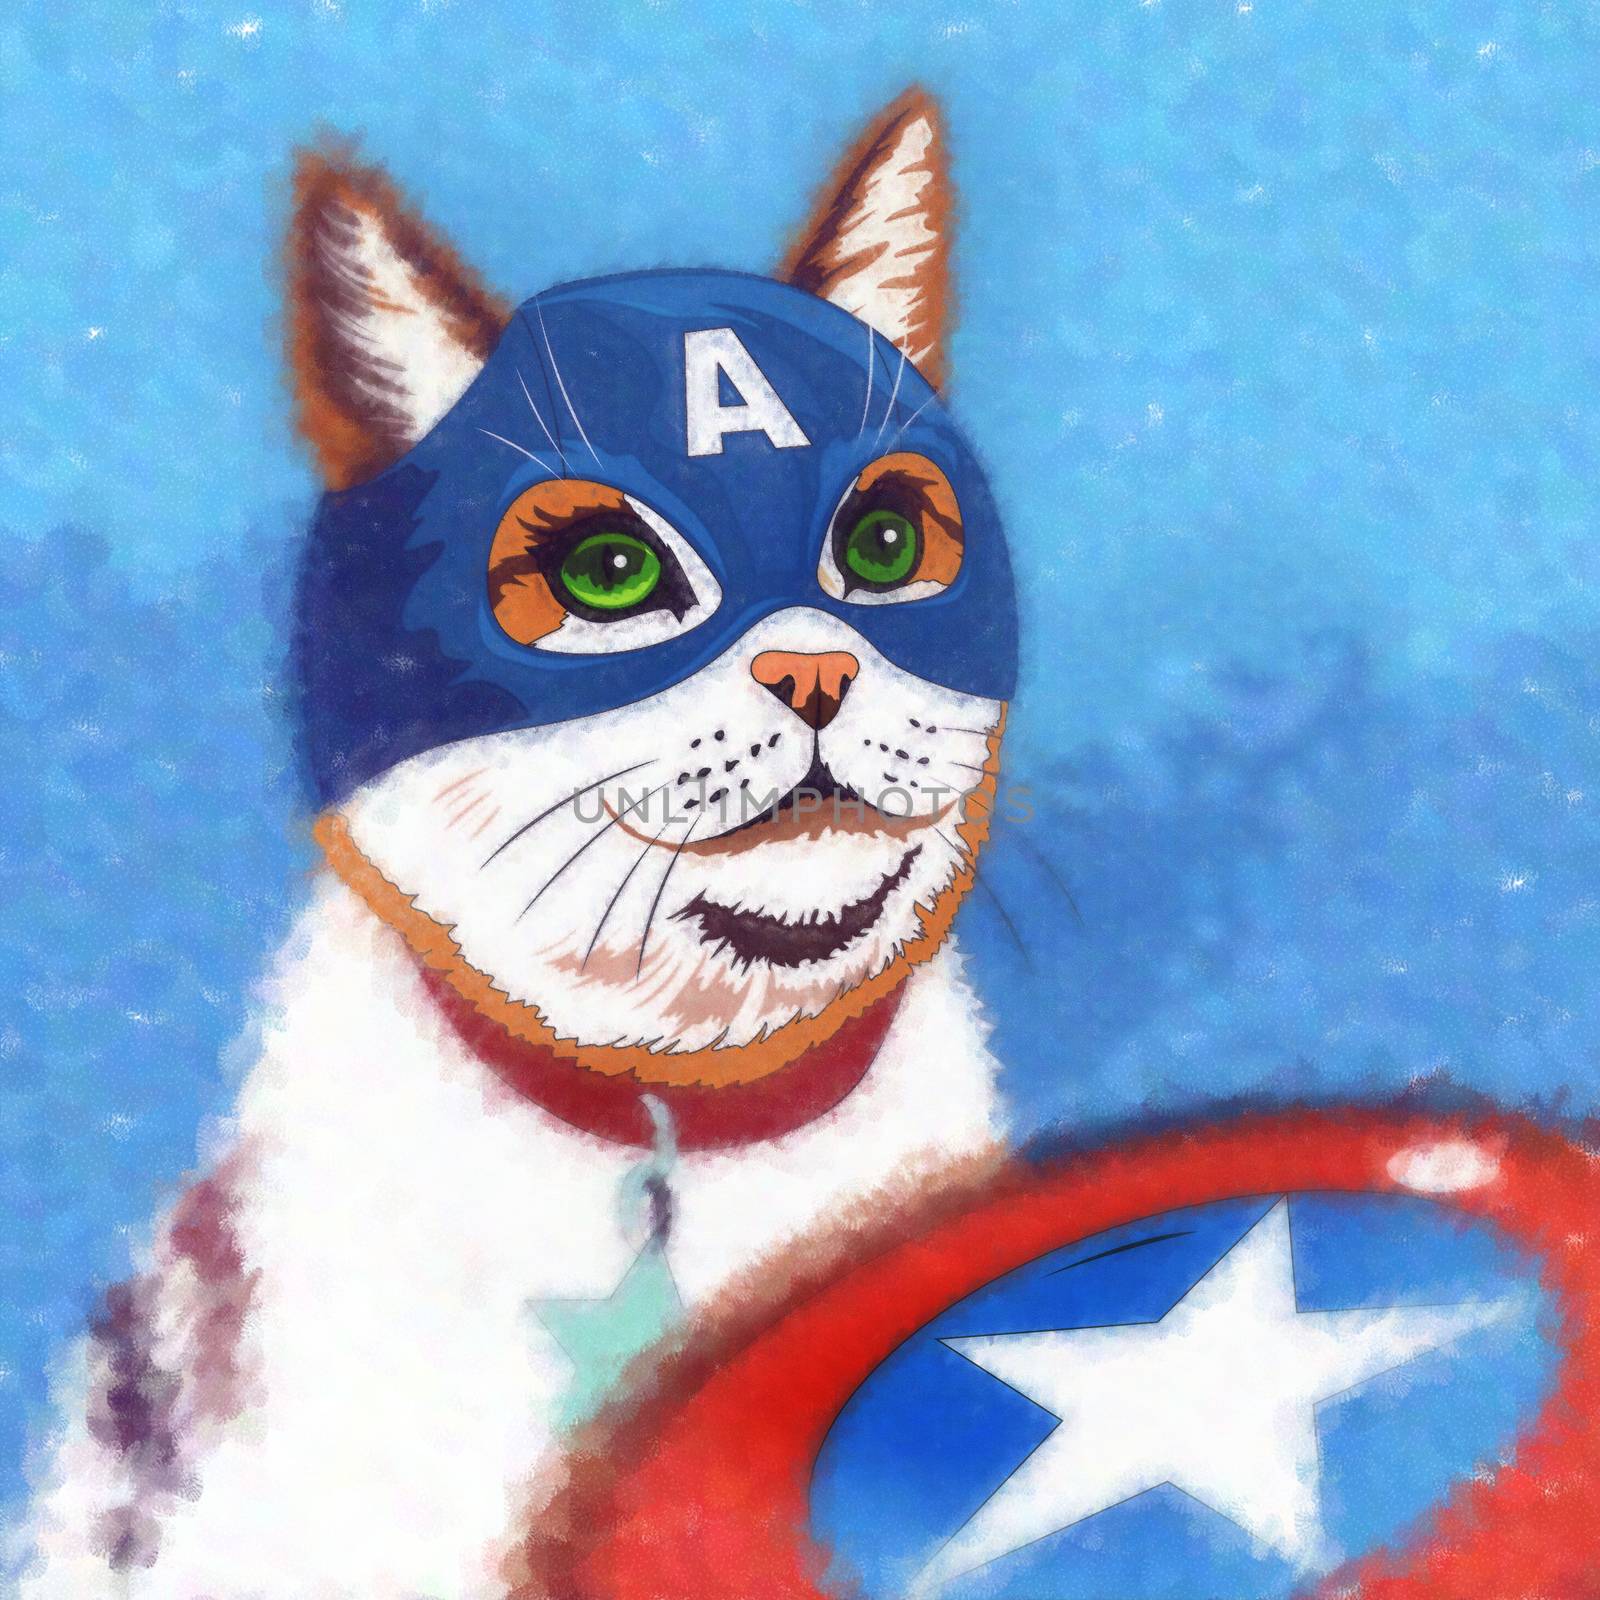 Captain America Cat. Watercolor sketch illustration of a cat at home.